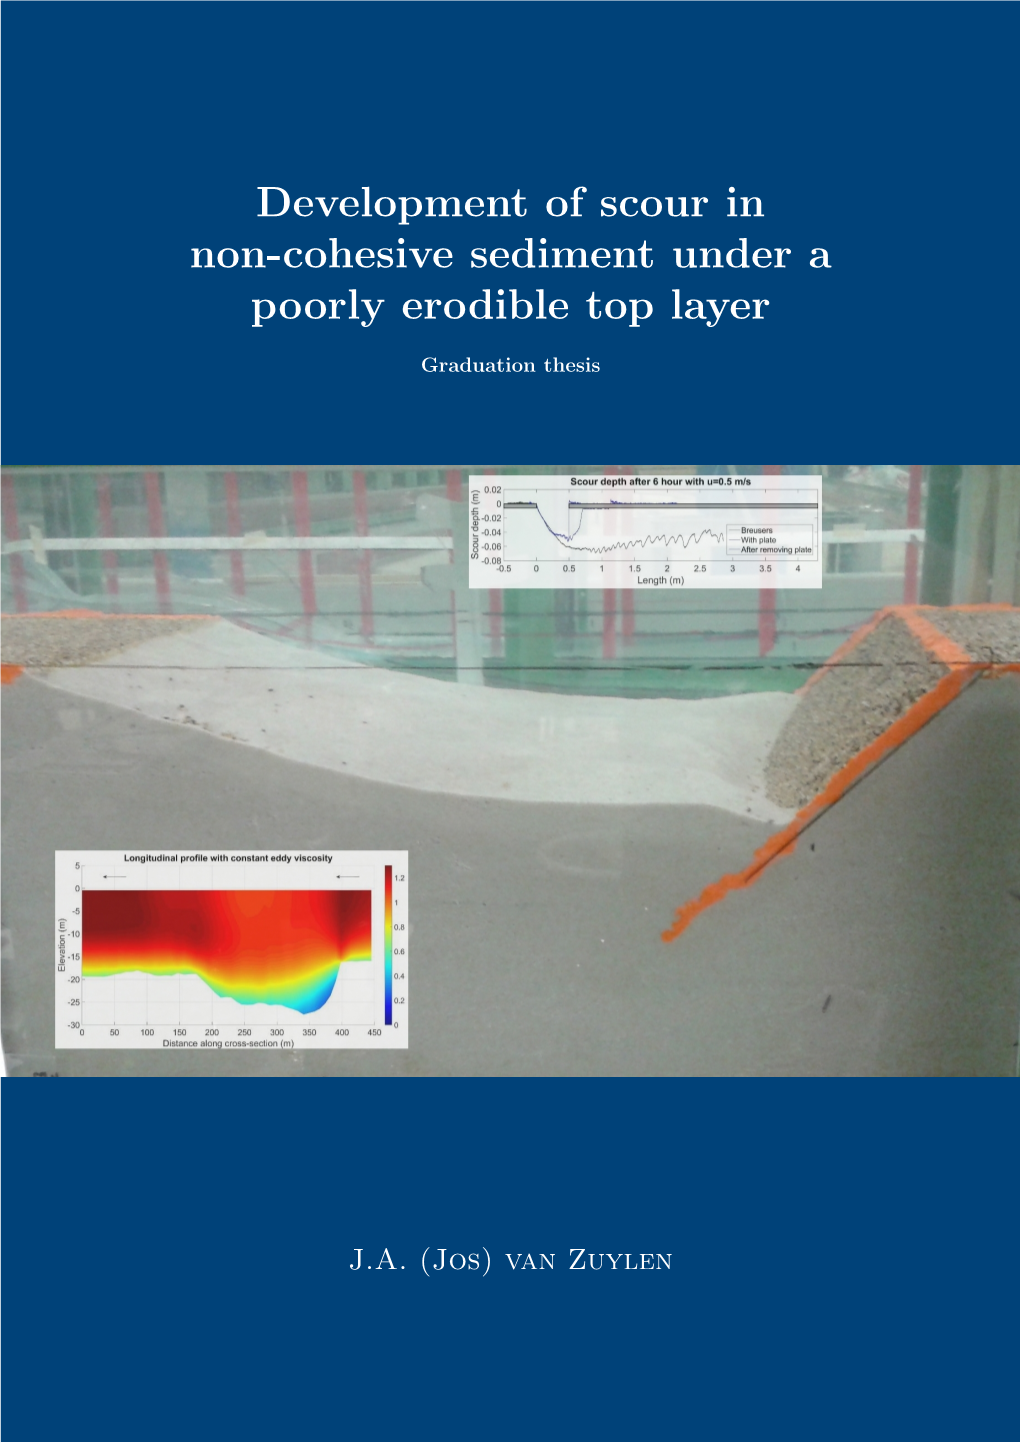 Development of Scour in Non-Cohesive Sediment Under a Poorly Erodible Top Layer